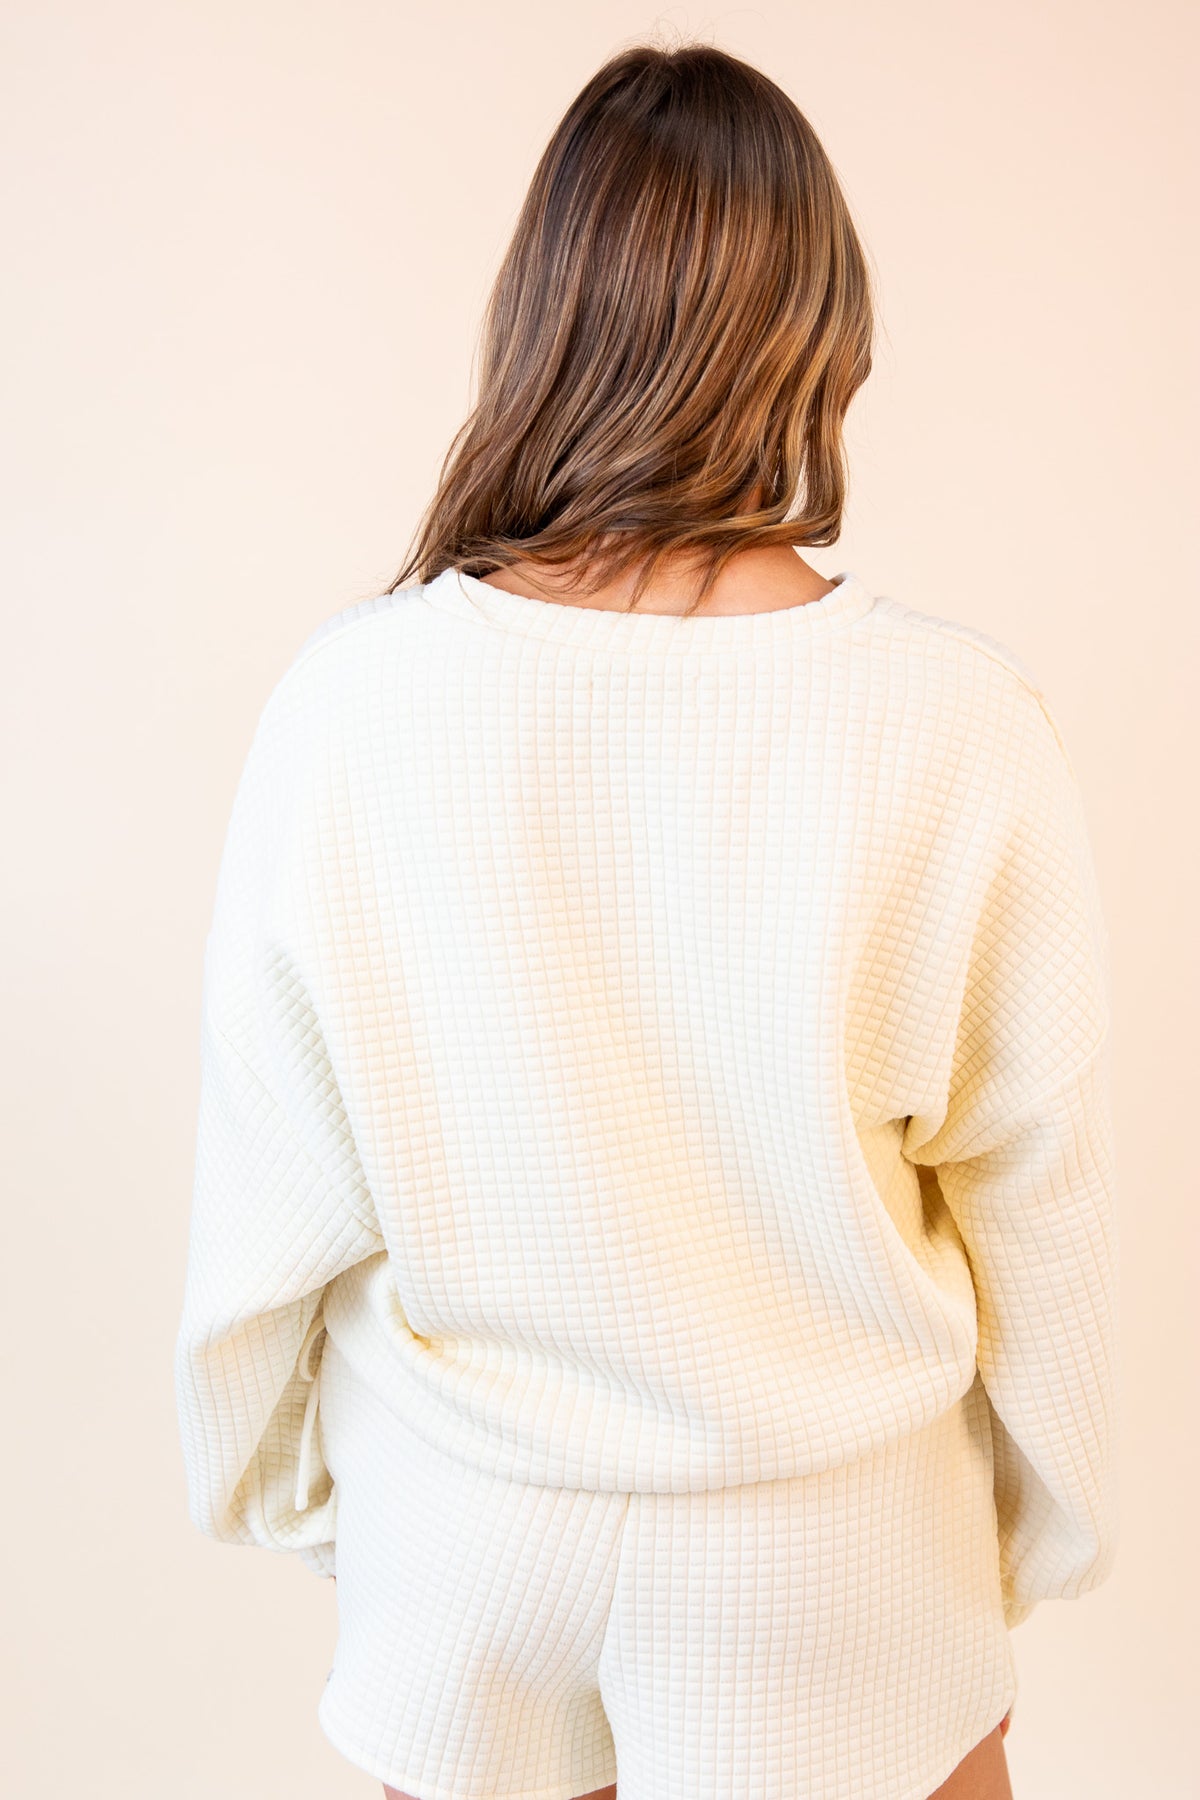 Pastime Textured Terry Sidetie Pullover